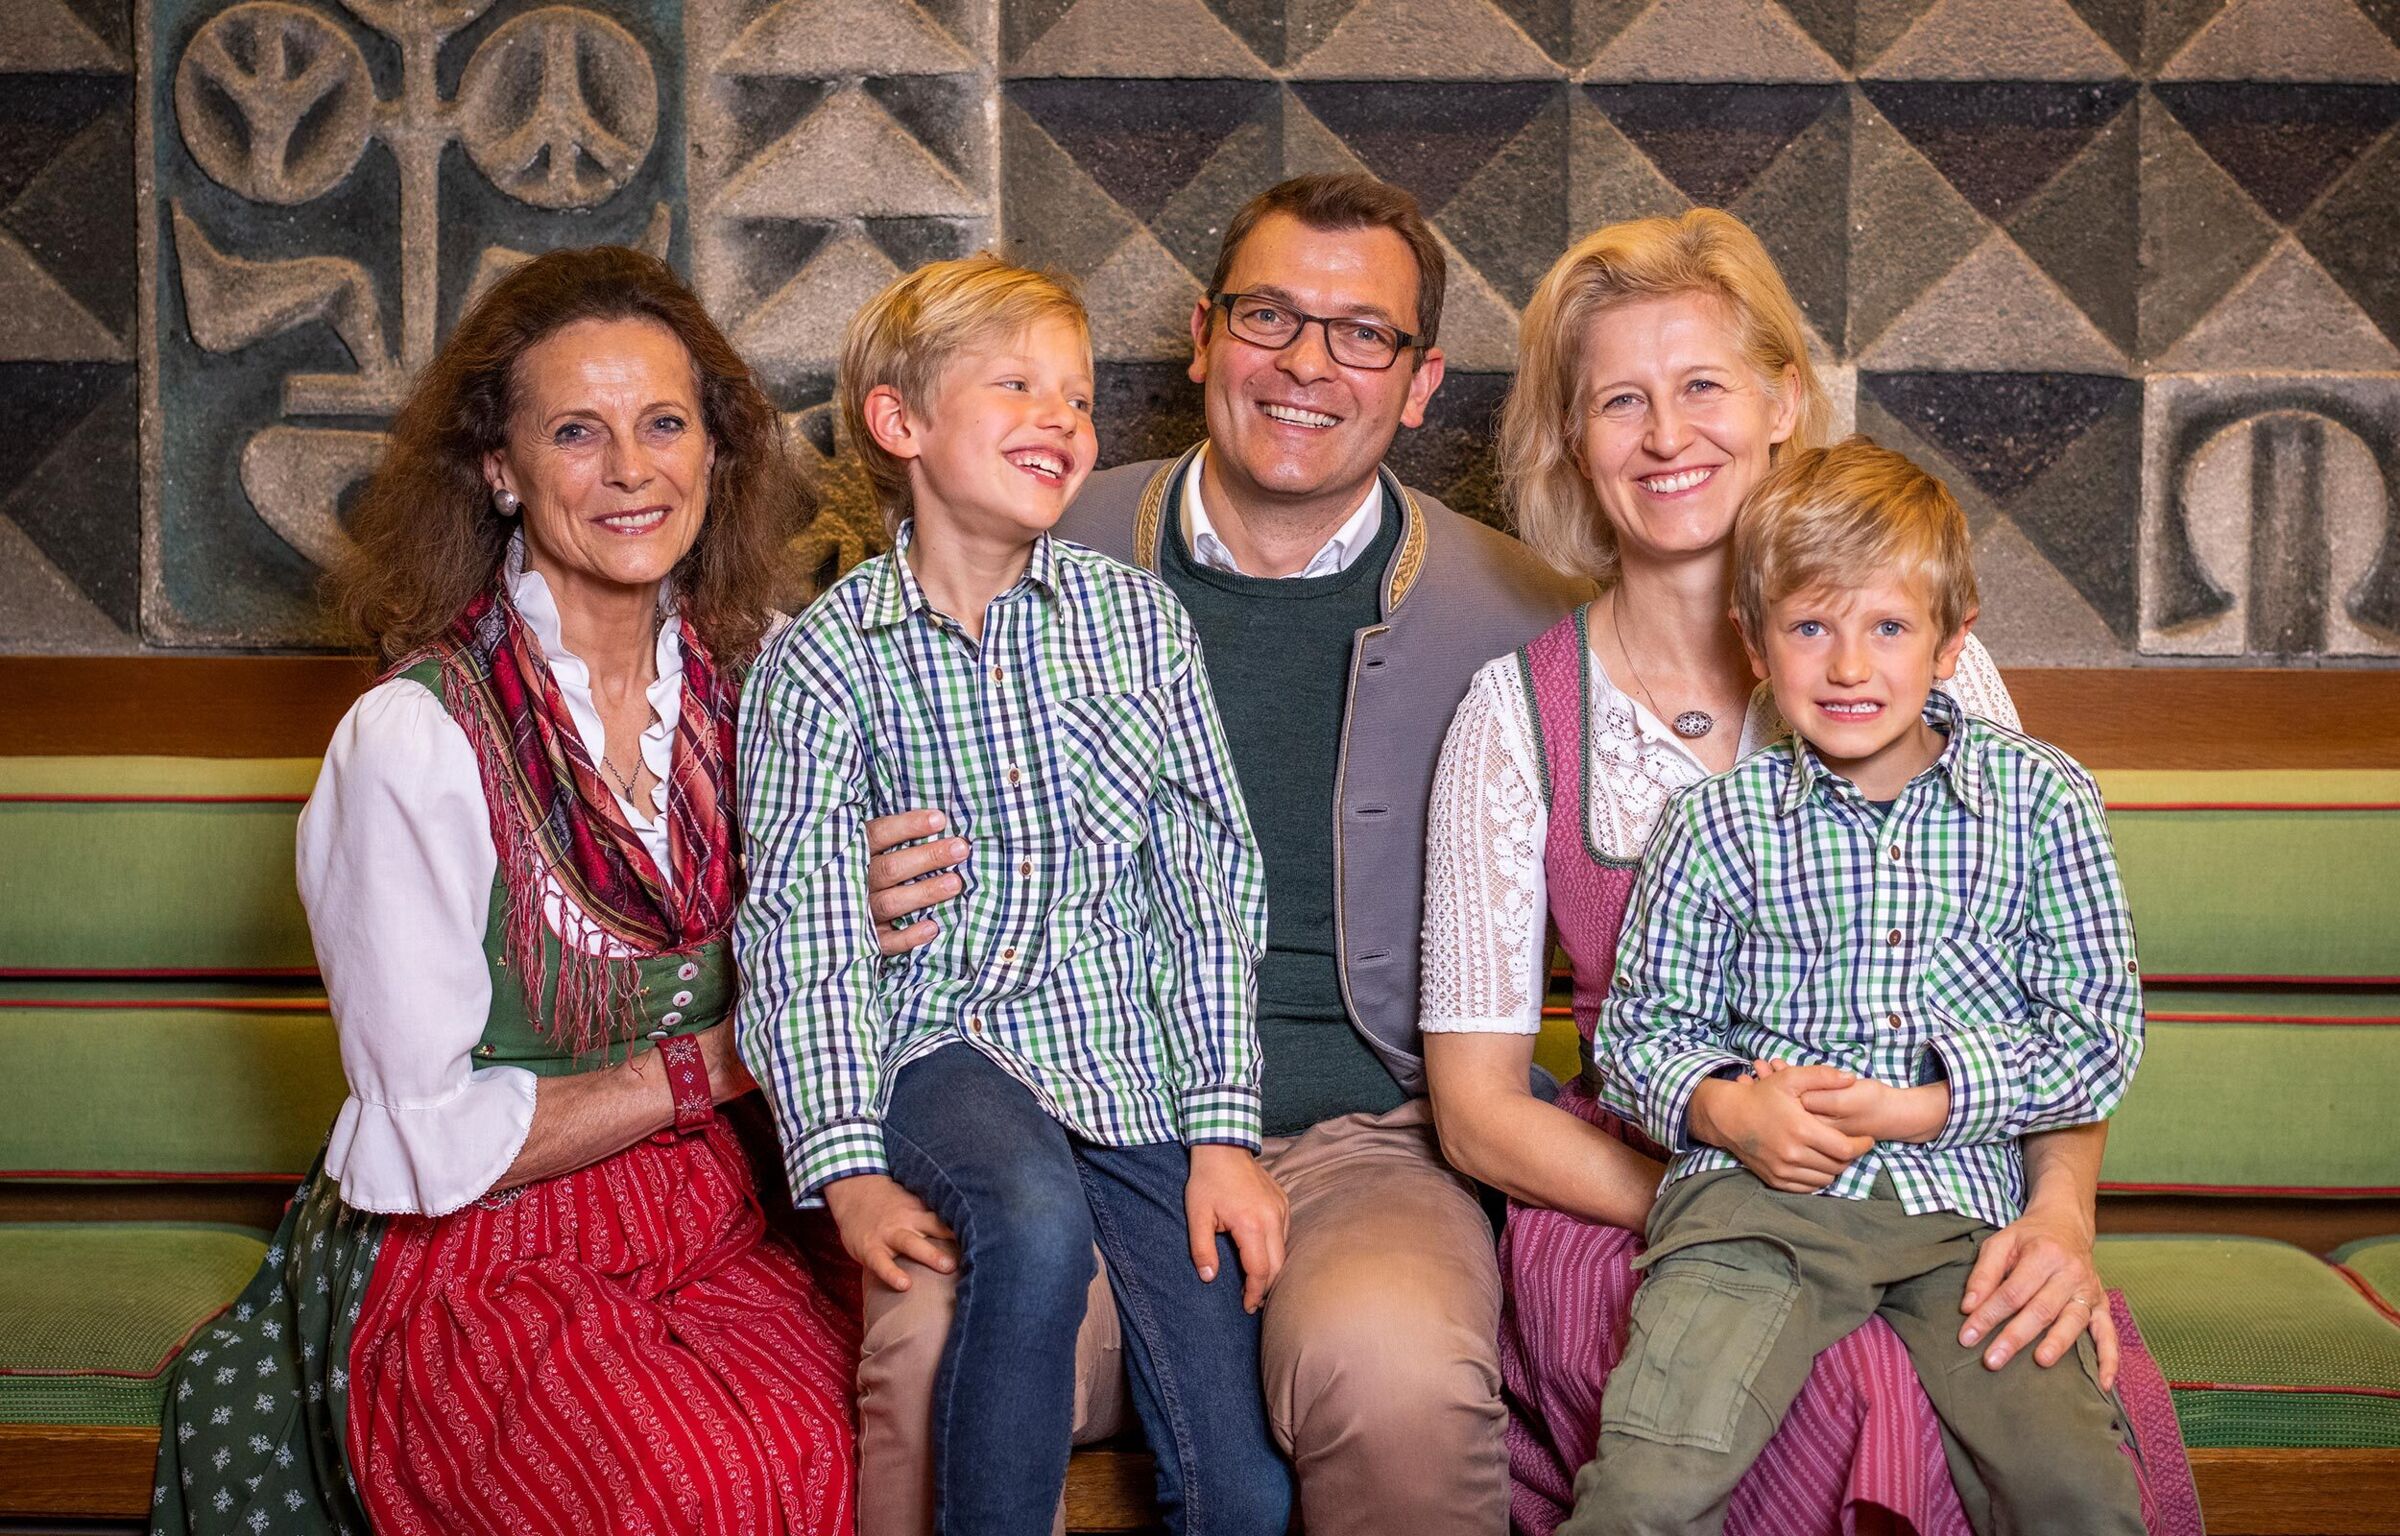 5-person family portrait of the Forstnig family, owners of the Trattlerhof.